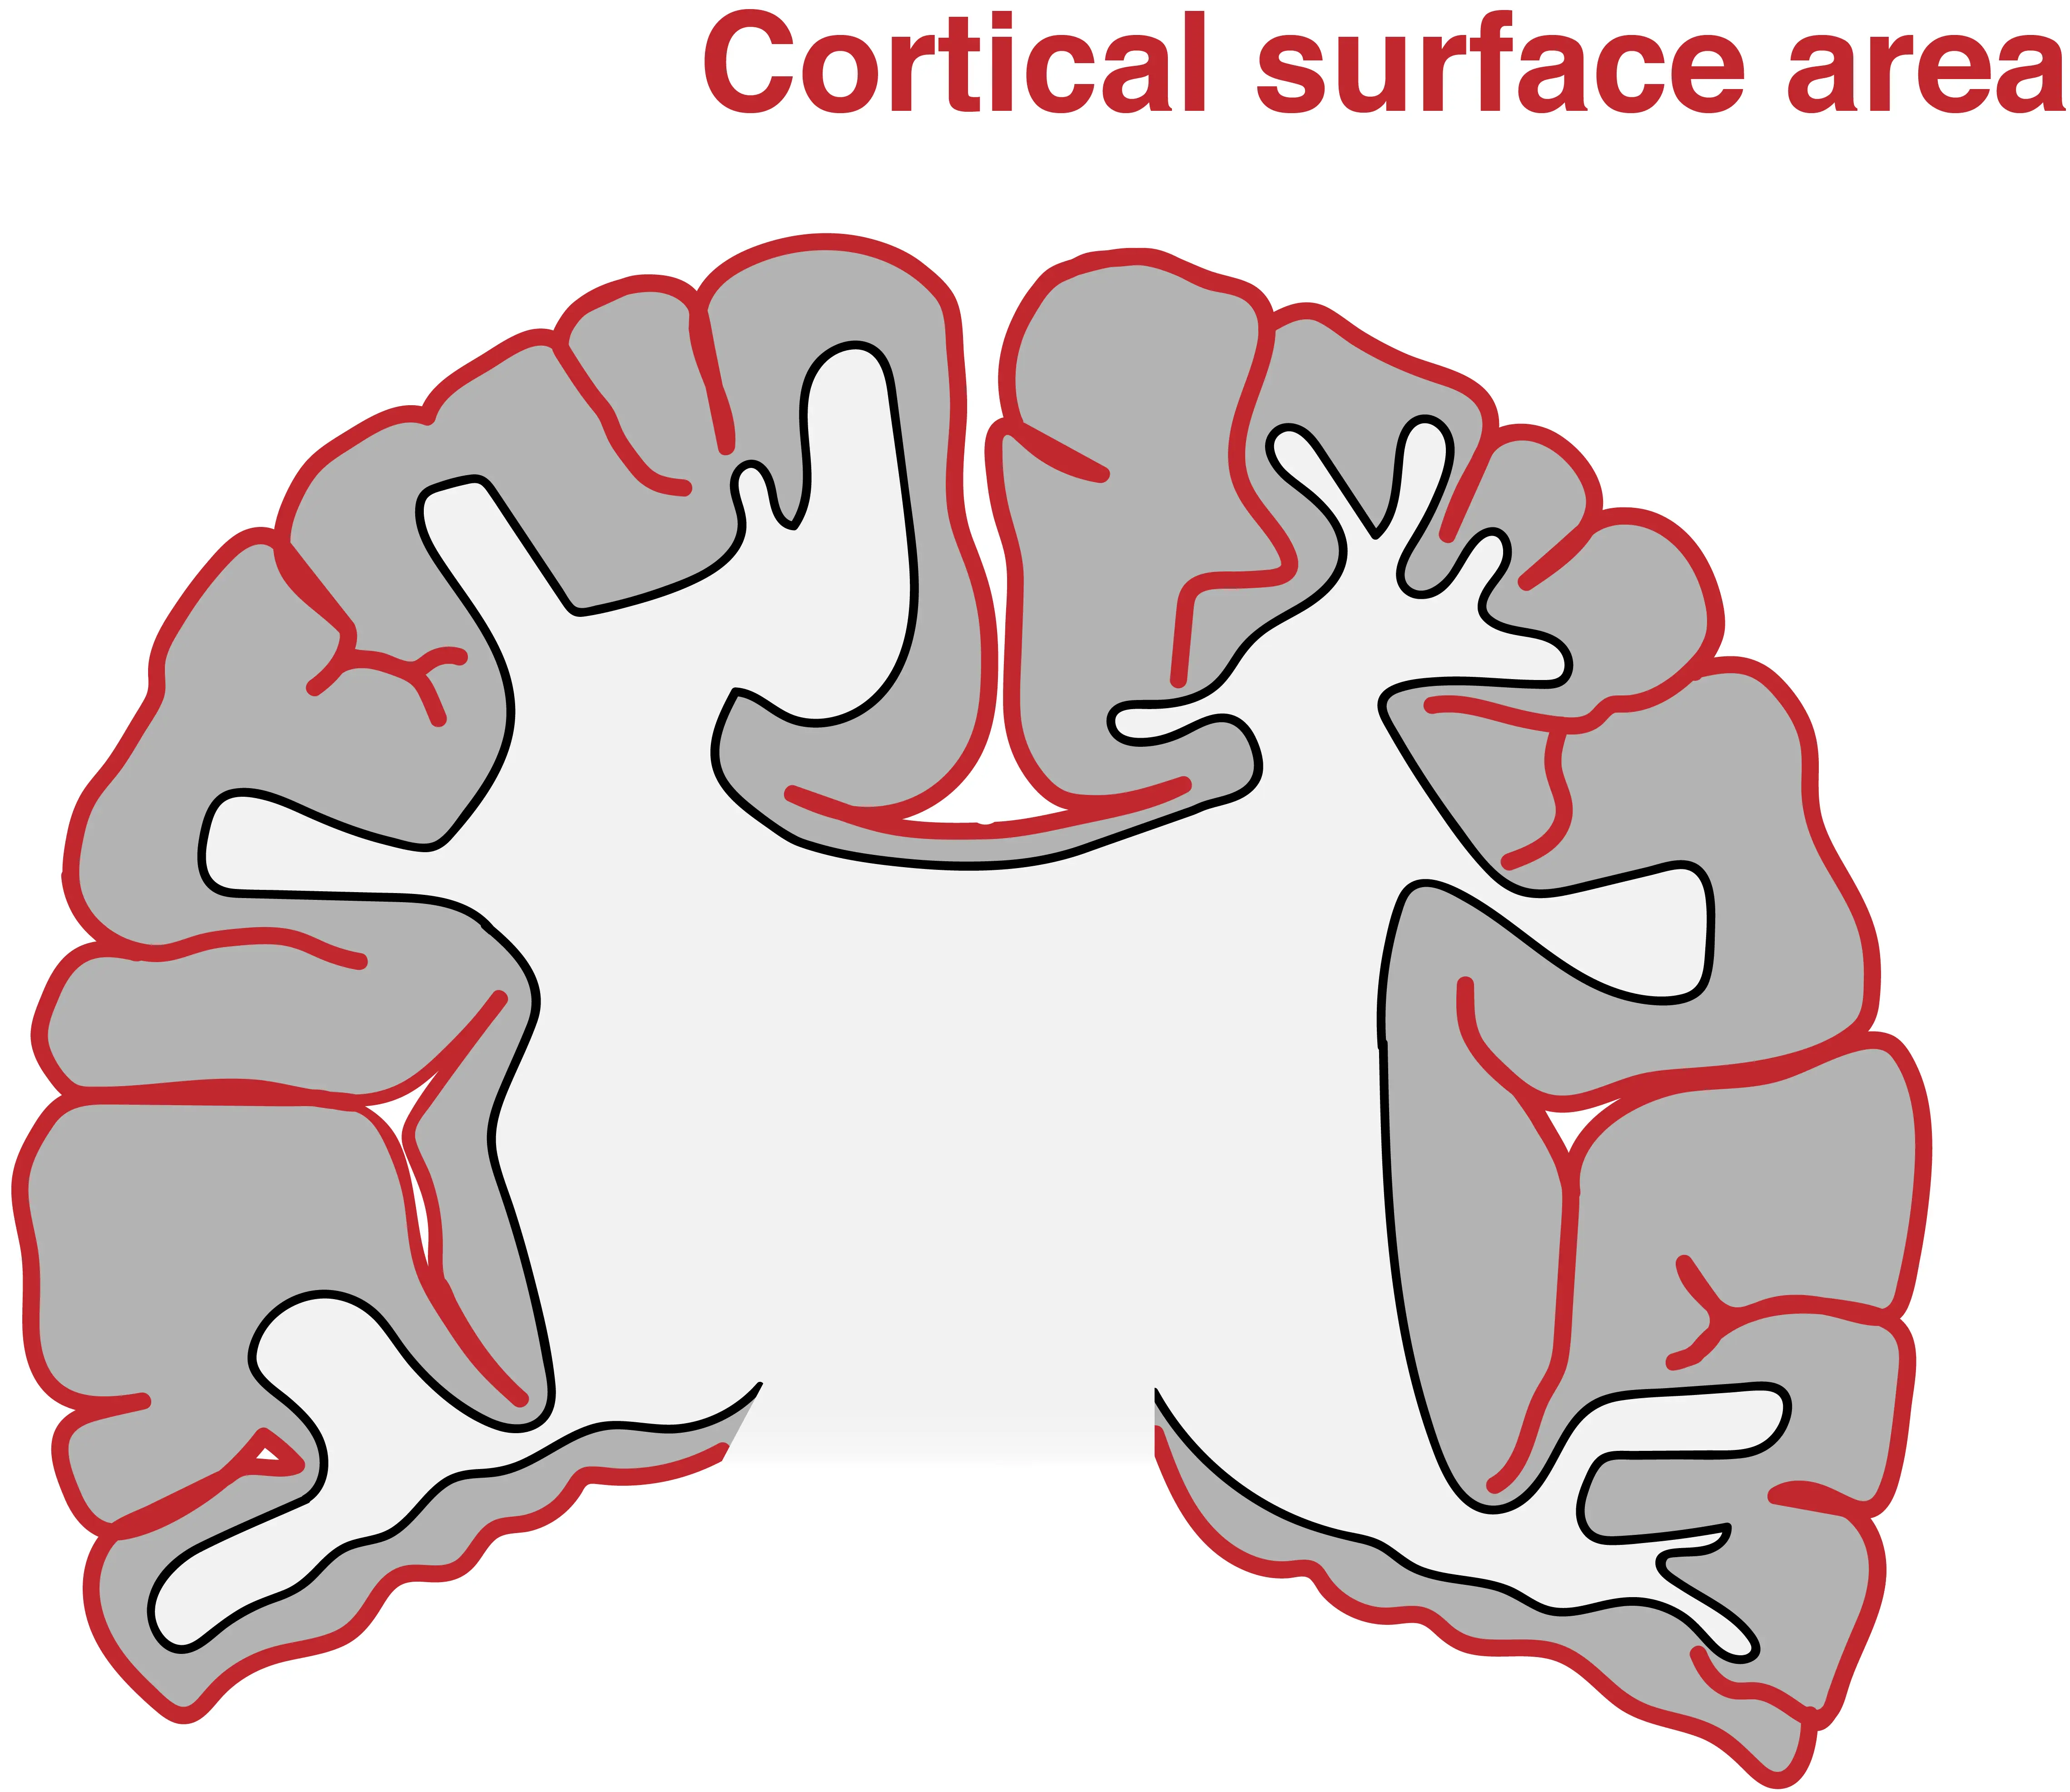 The many folds of the brain cortex increase its surface area.